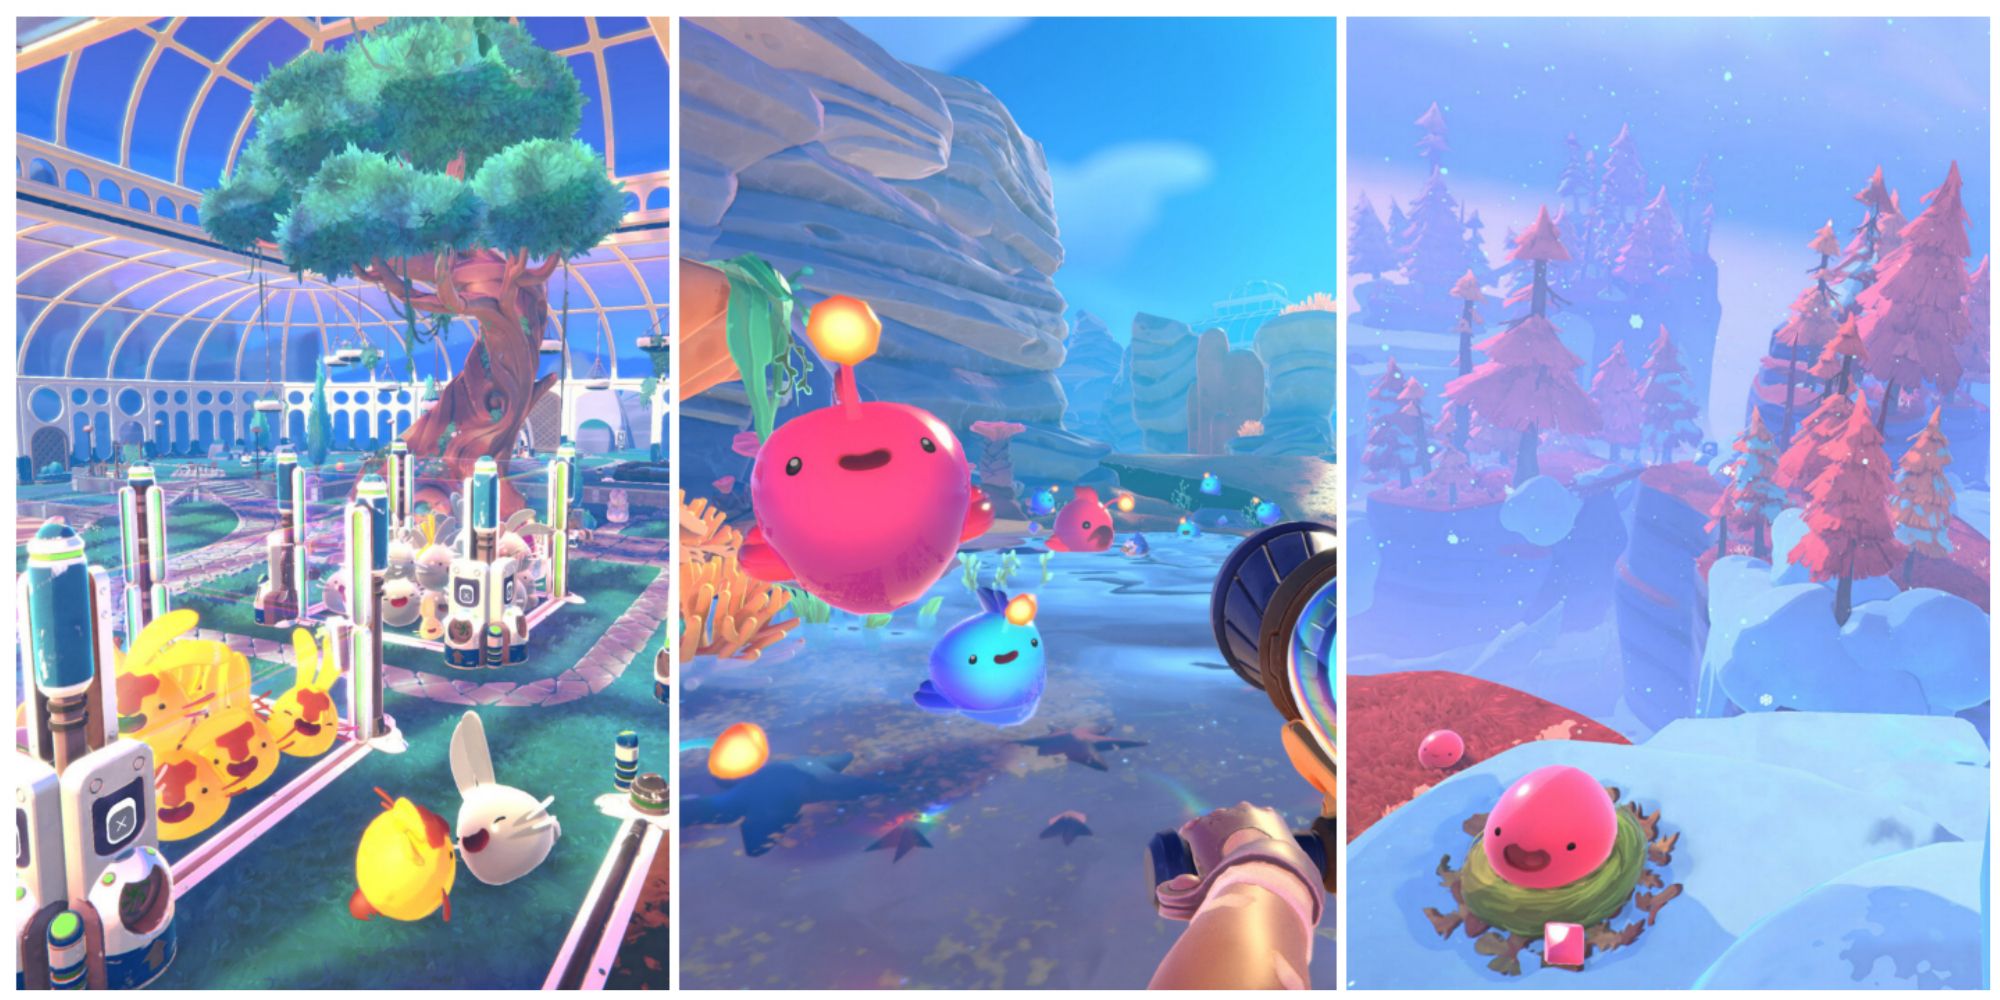 3 different views from Slime Rancher 2 